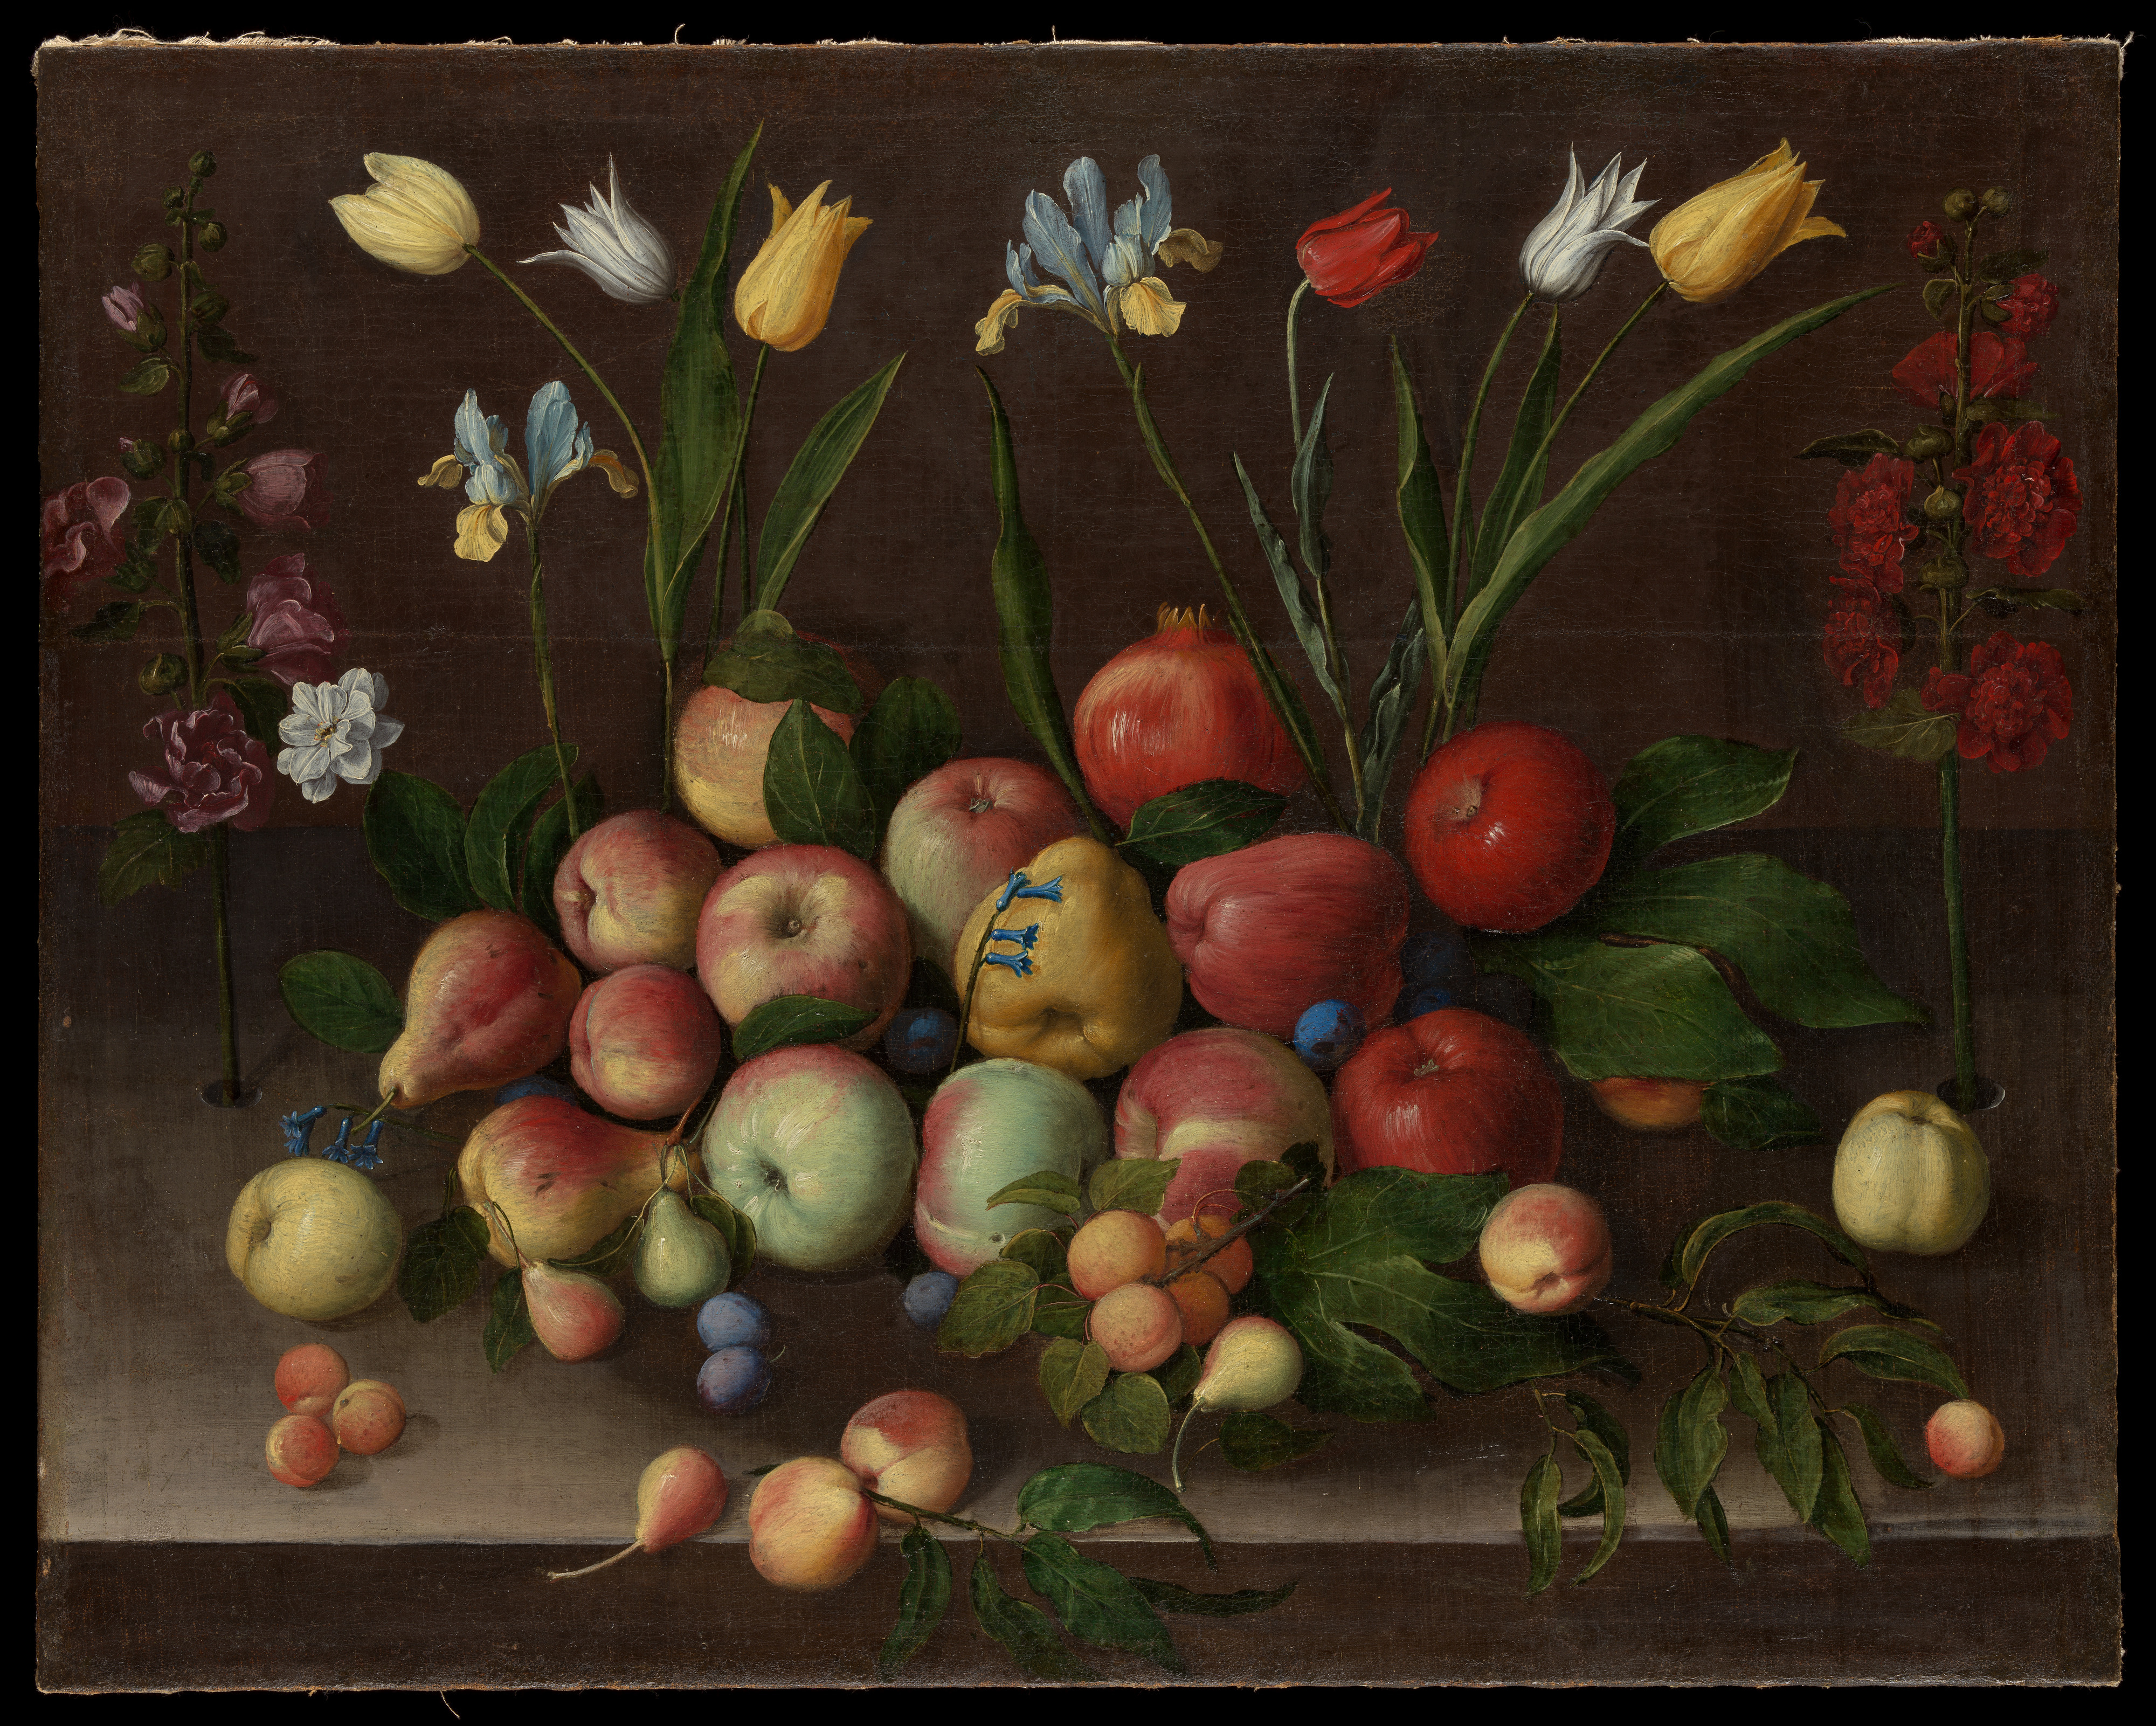 Fruit and Flowers by Orsola Maddalena Caccia - ca. 1630 - 30 × 39 in. (76.2 × 99.1 cm) Metropolitan Museum of Art